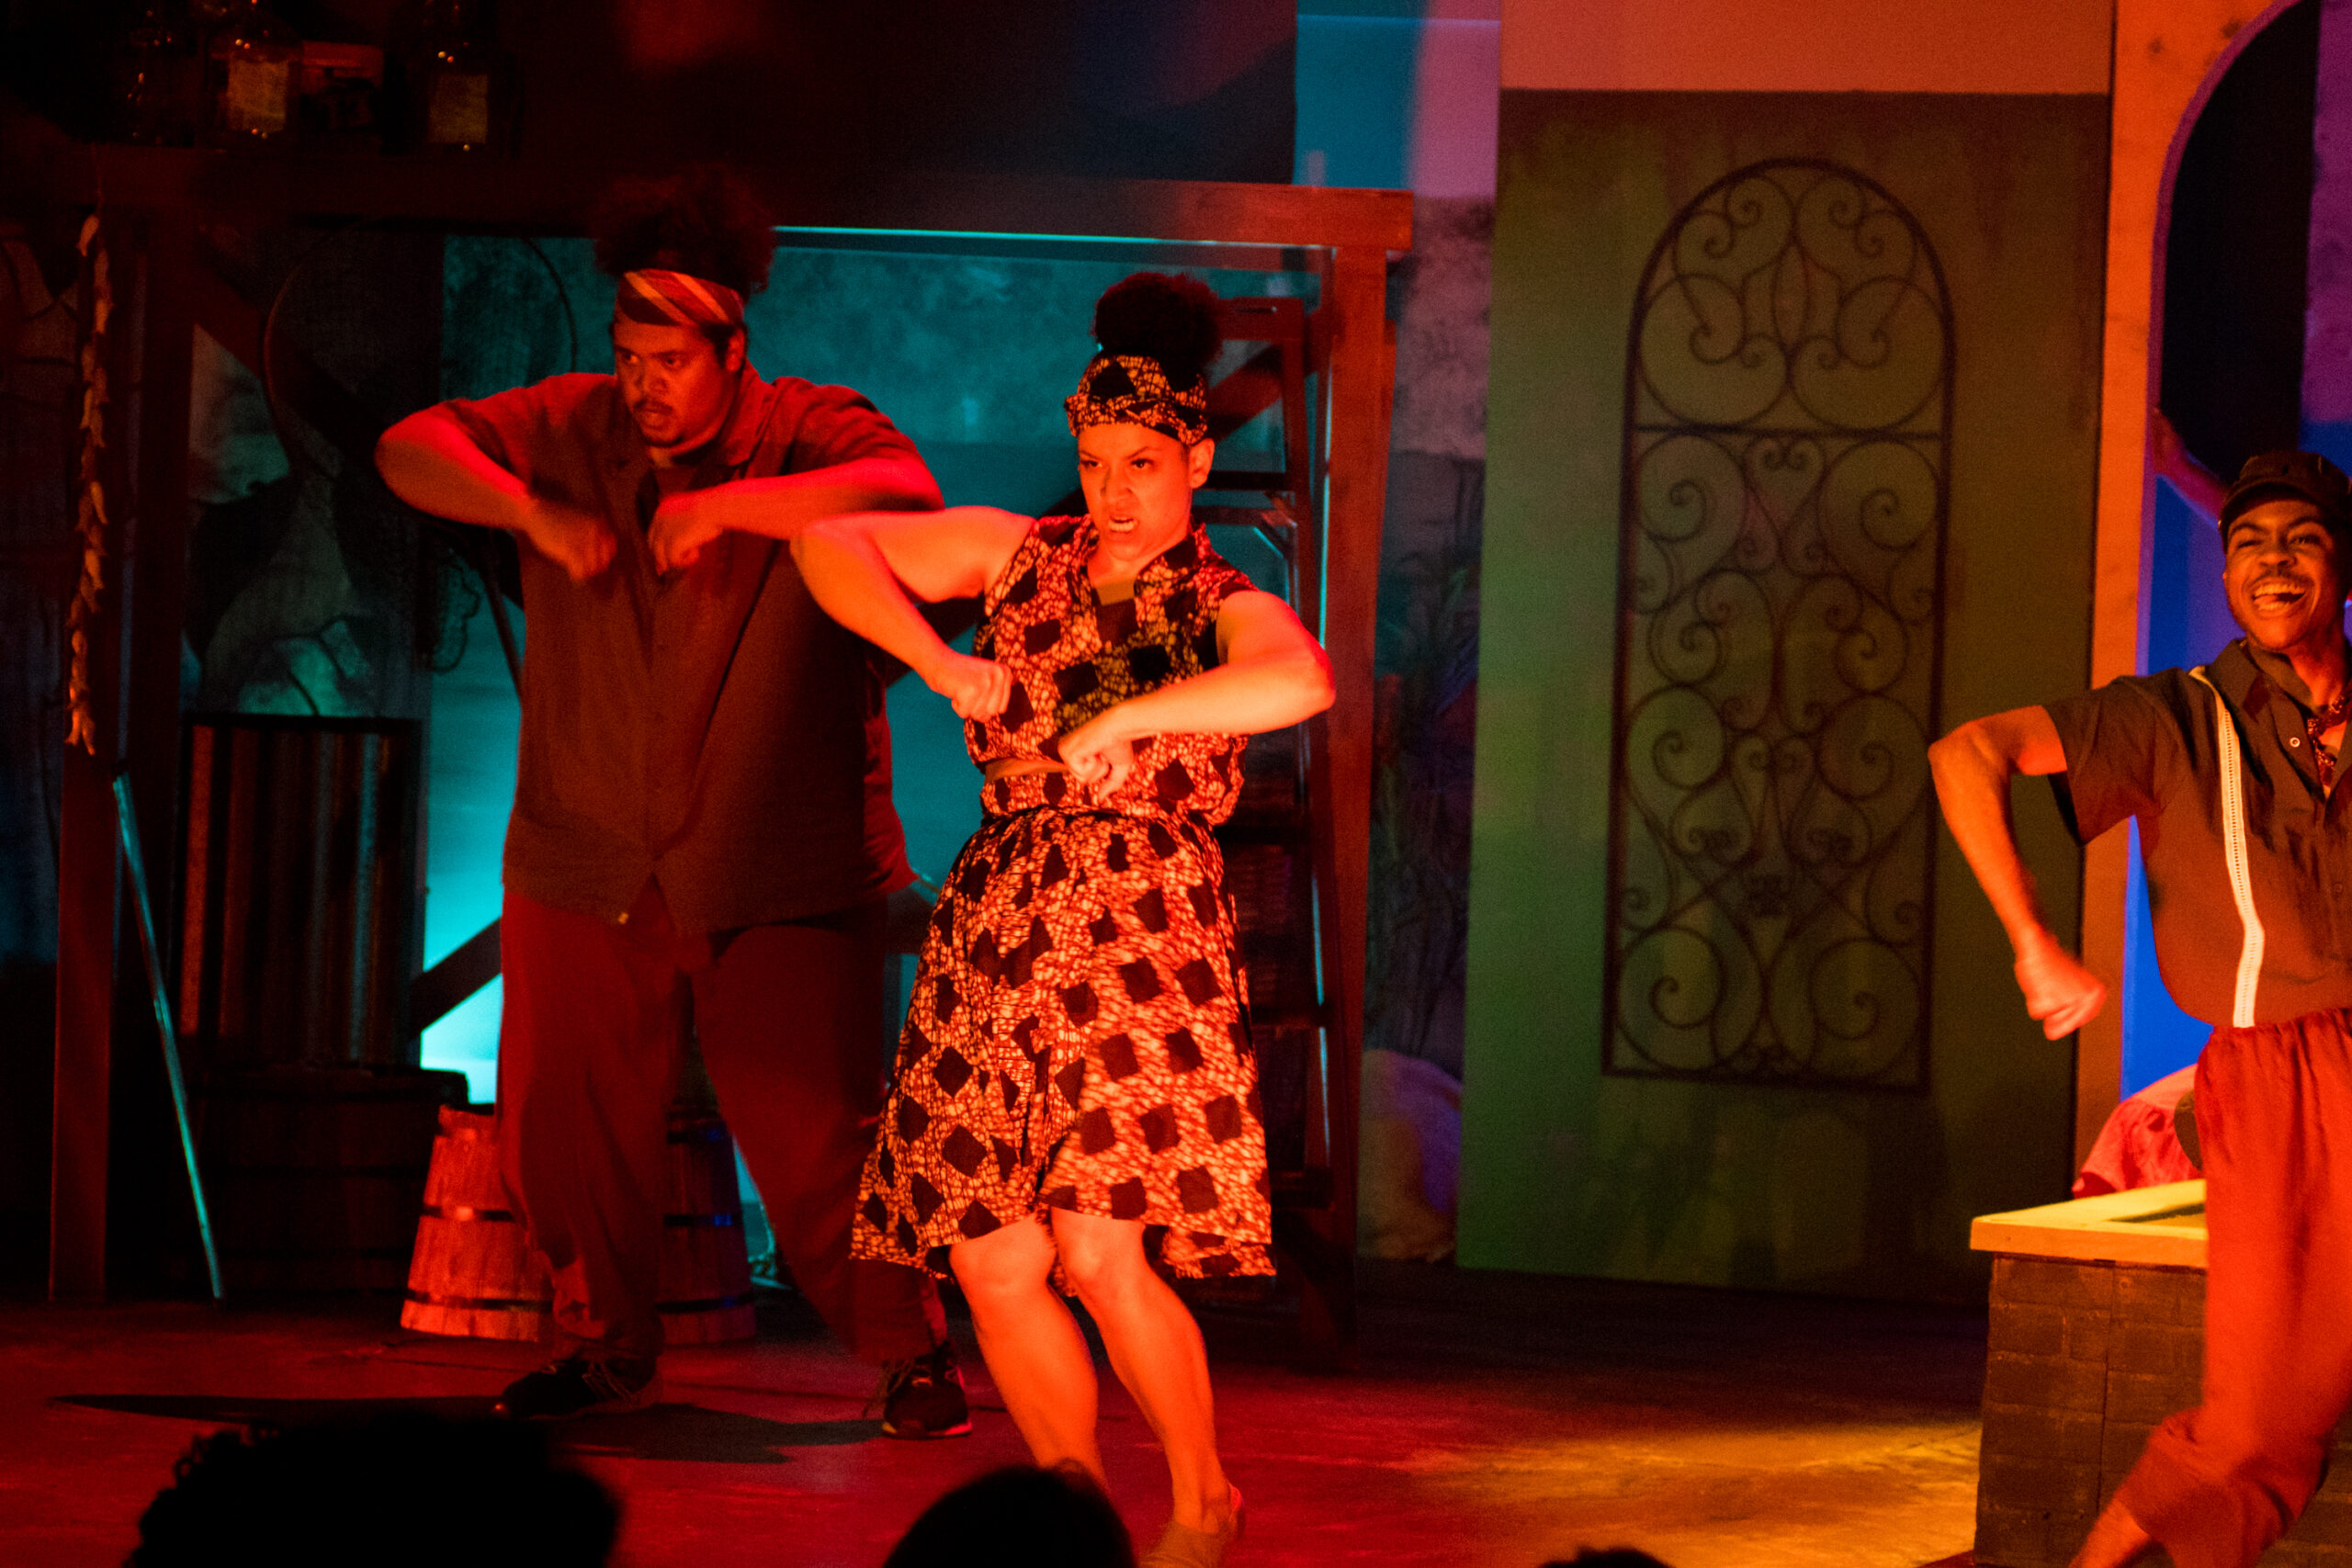 The Storytellers perform a dance number (?: Jerry Fritchman)